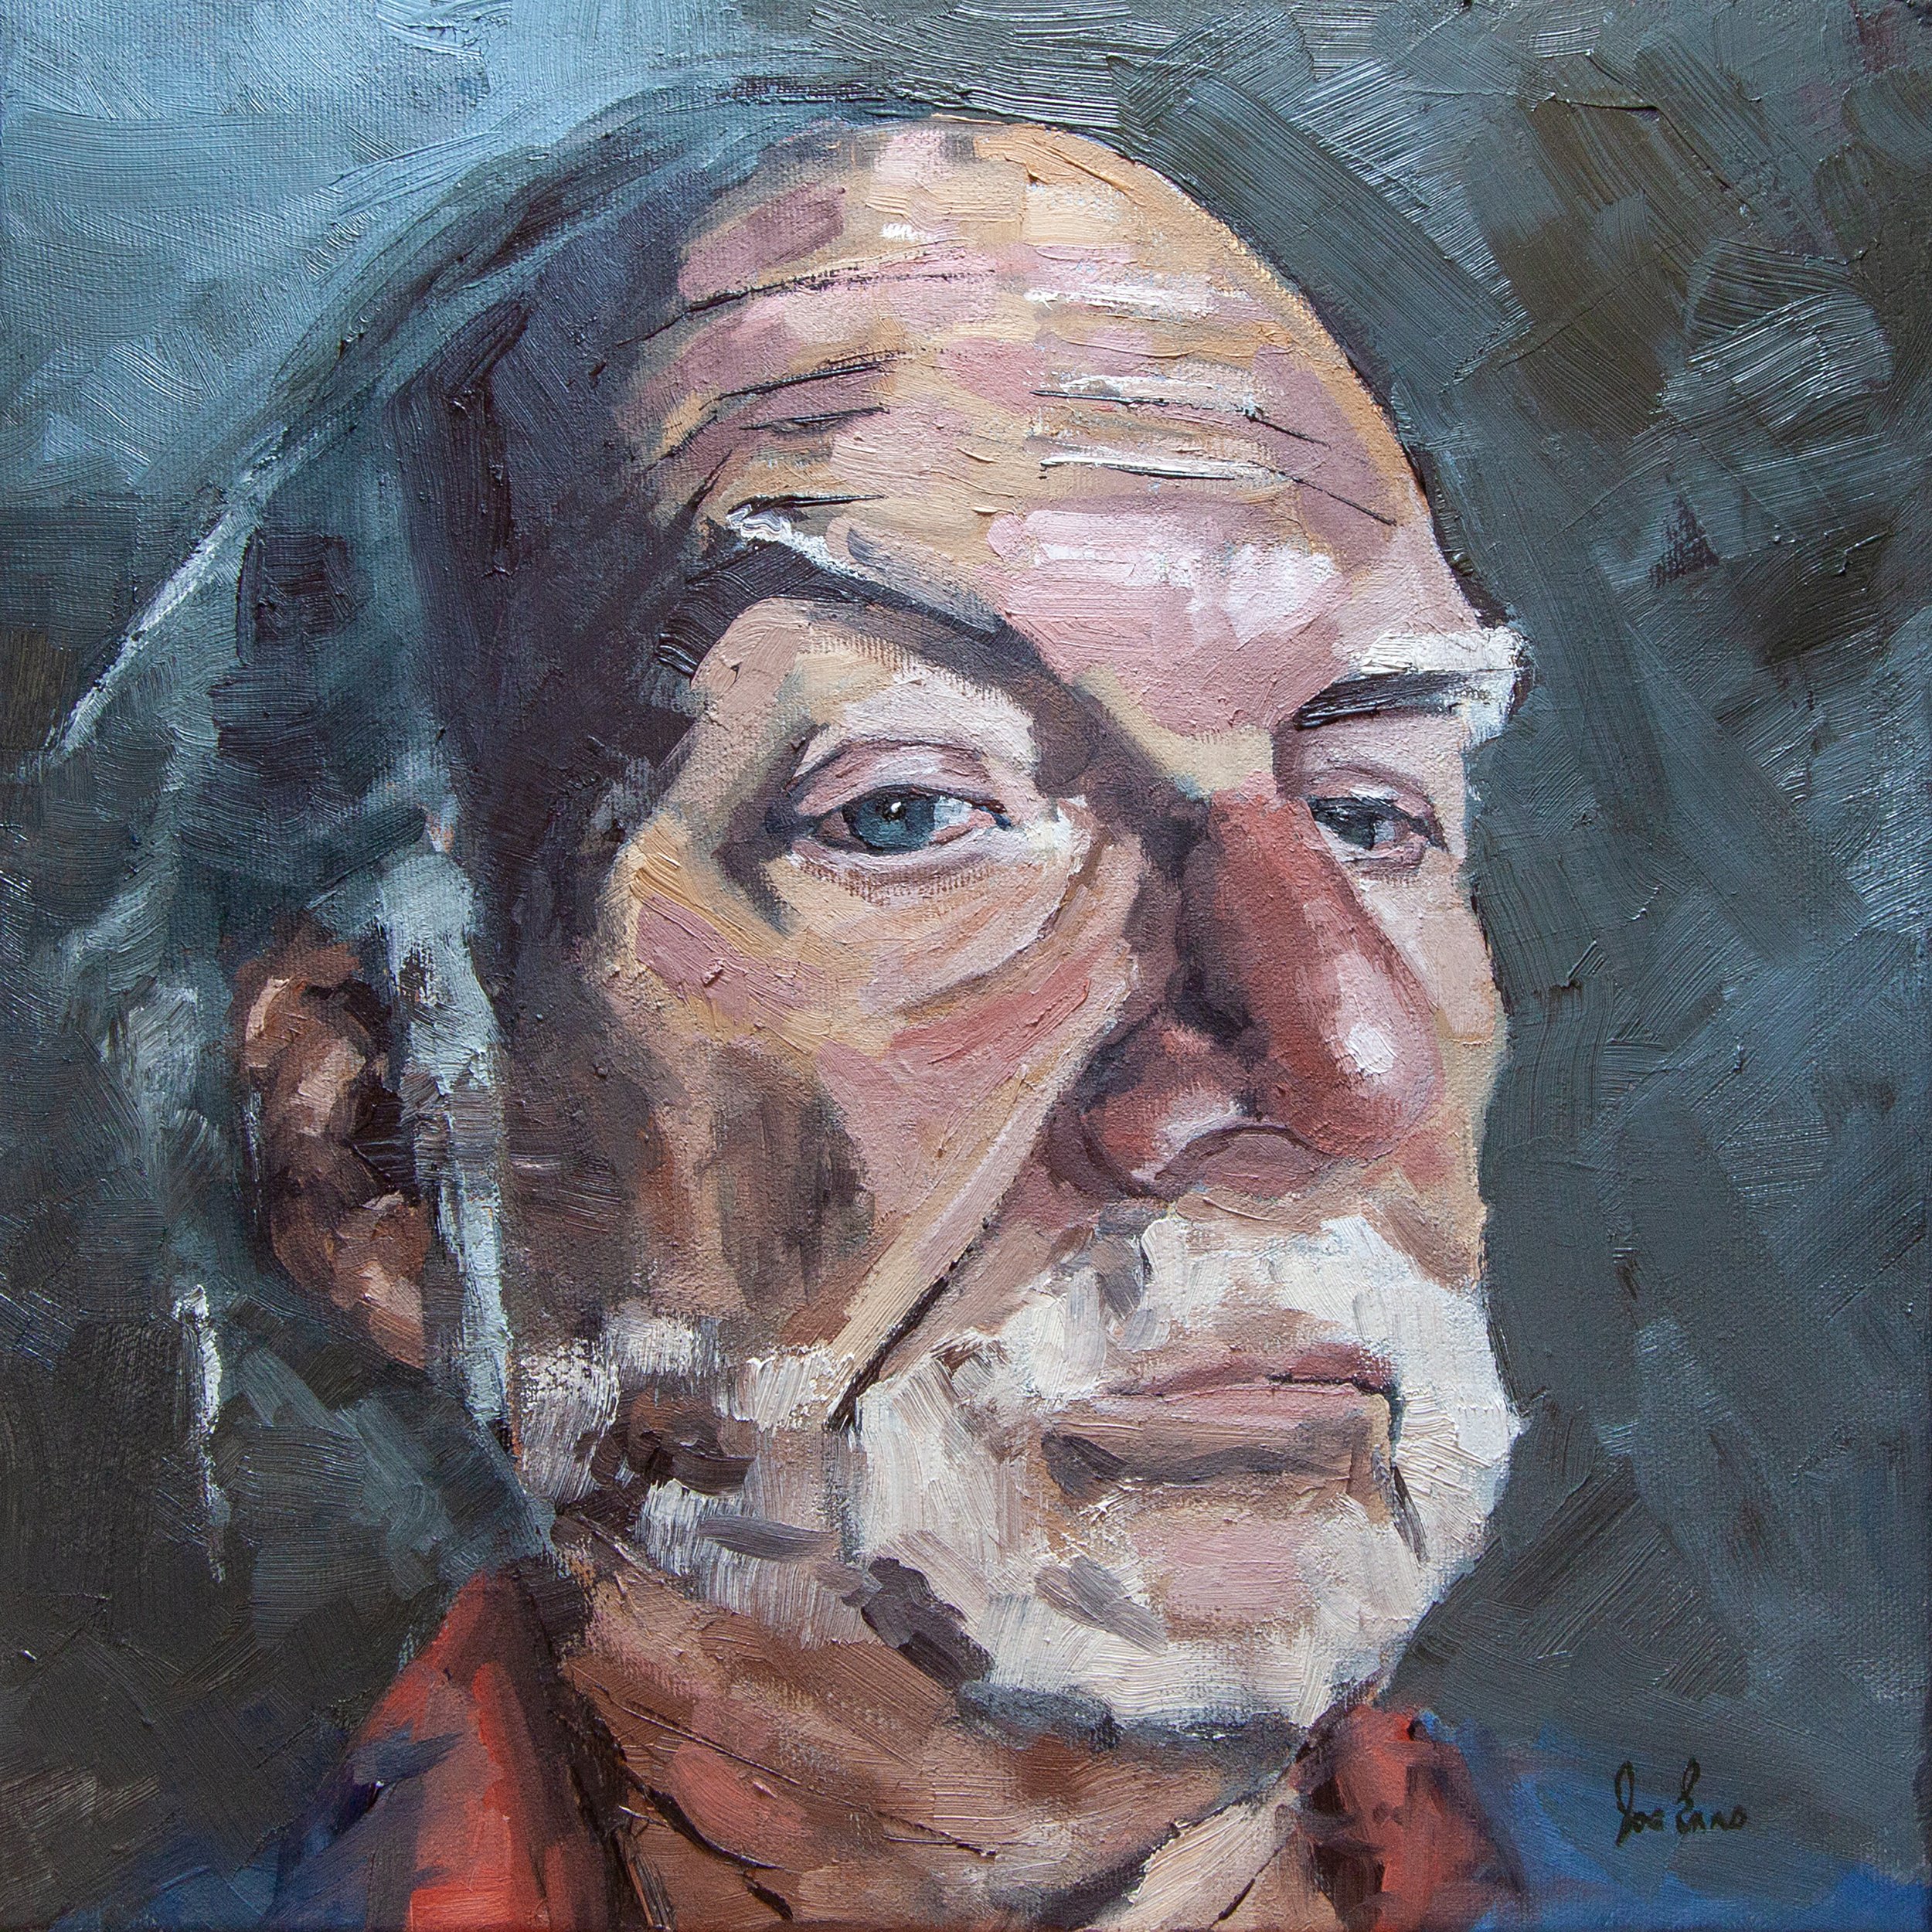 David Portrait - oil on canvas, 12 x 12 inches, AVAILABLE